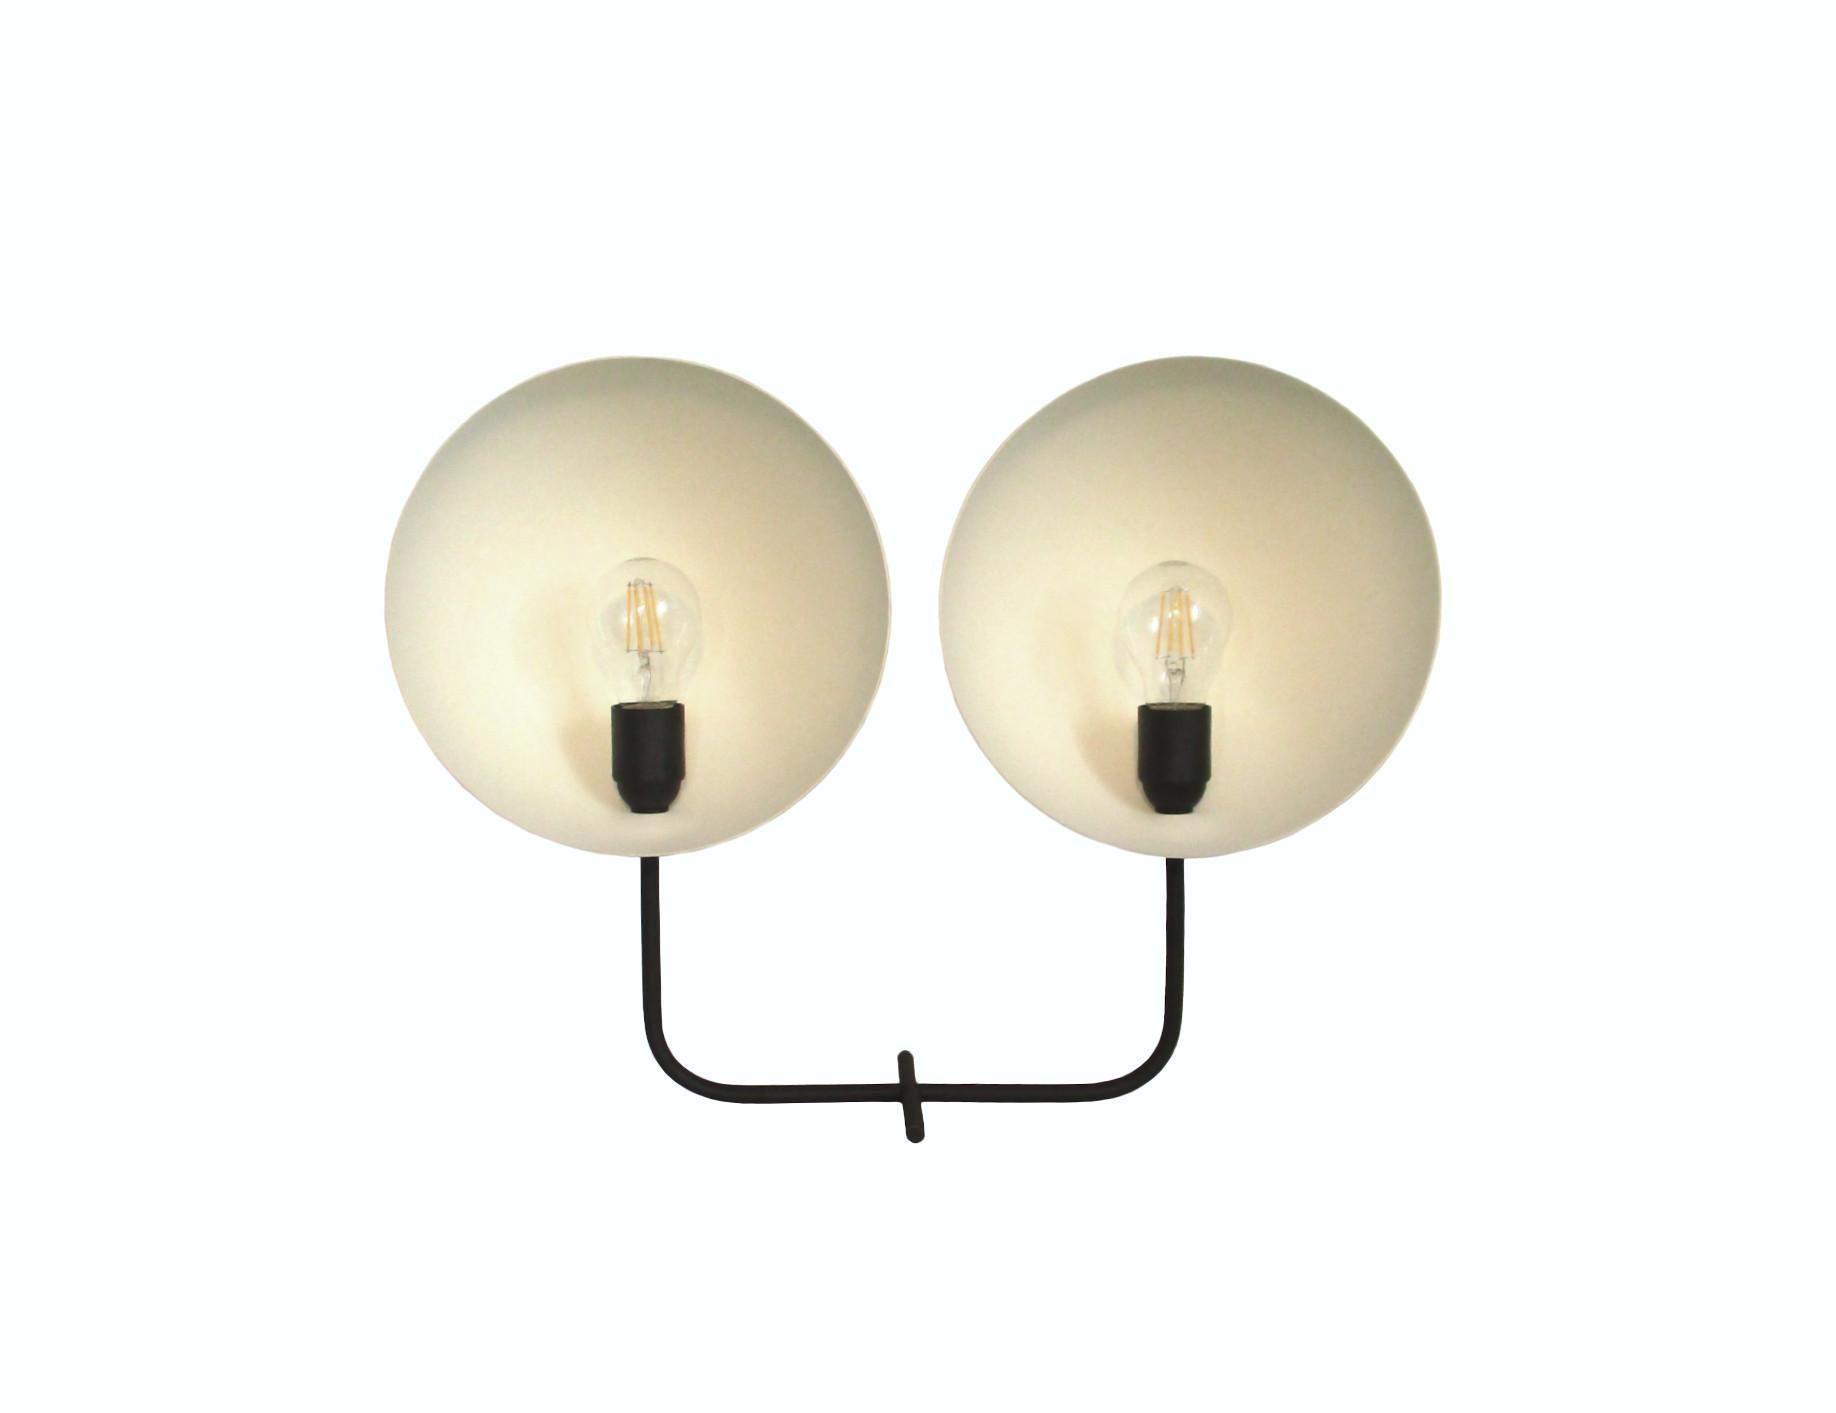 Two rotational domes allowing the direction of the light, for direct or indirect lighting, as the user desires, providing sensations to daily life, home work, relaxing time, reading etc. The dynamic and symmetrical design allows the user to choose